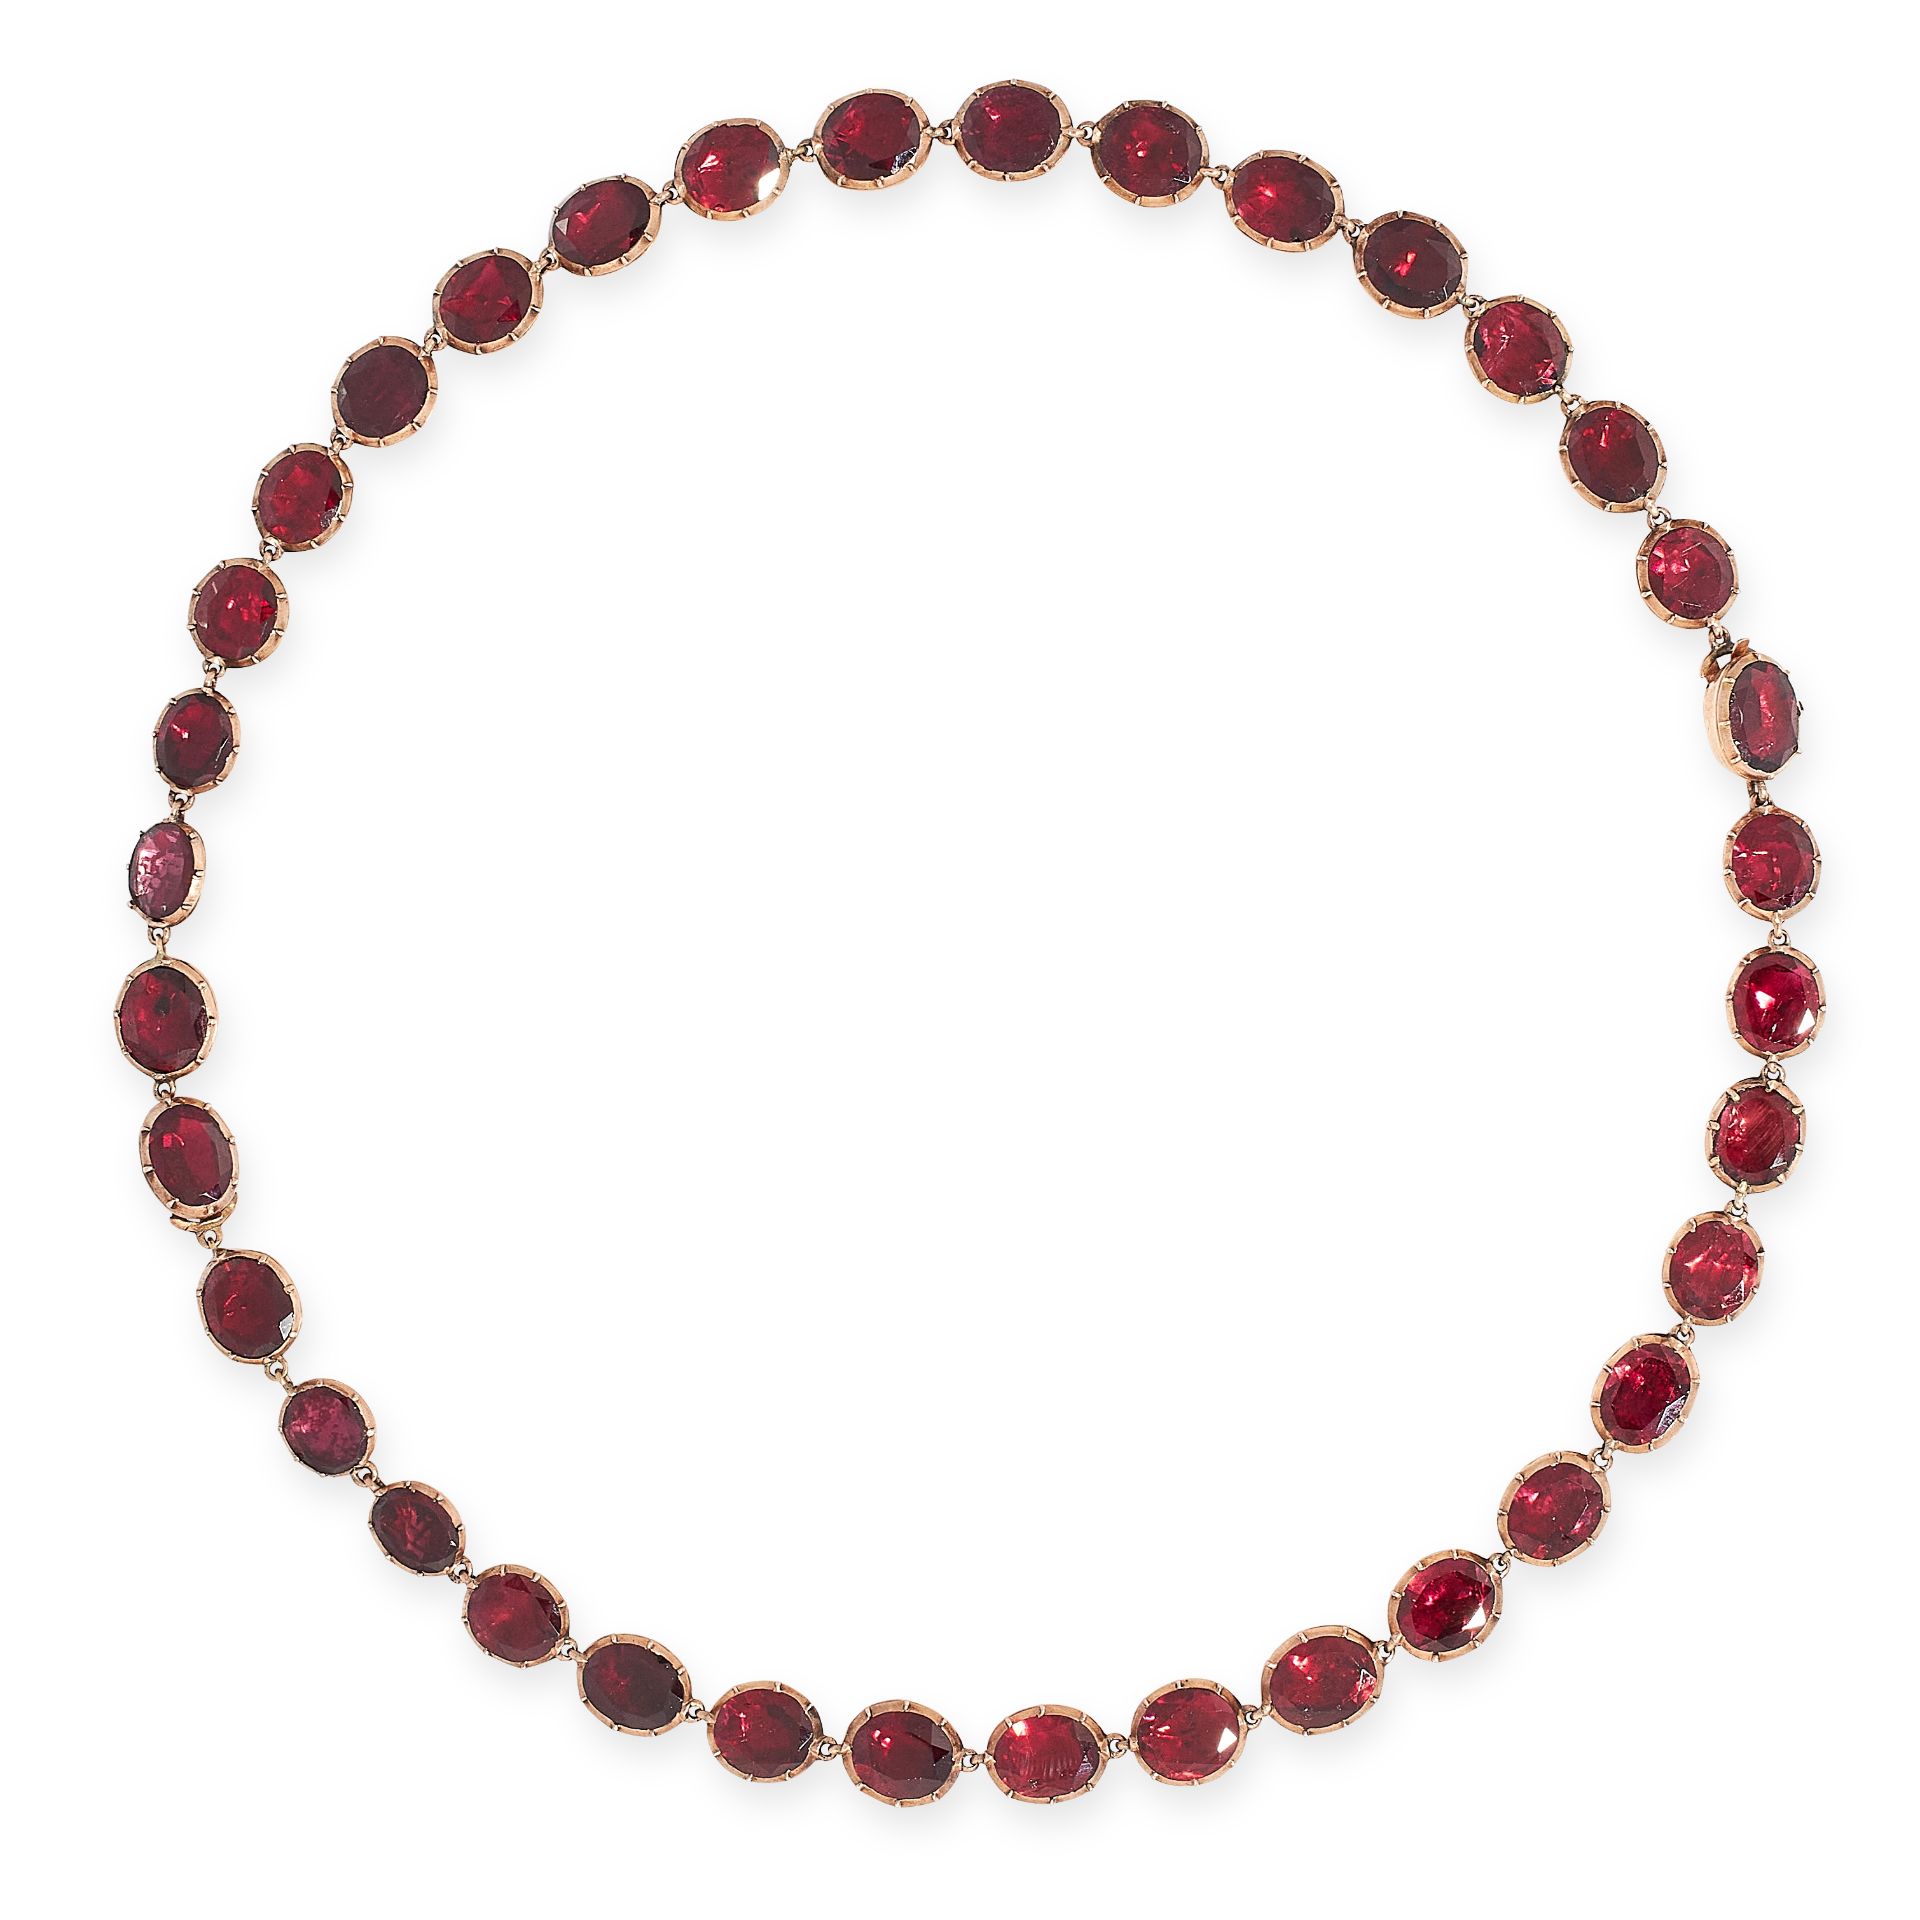 AN ANTIQUE GARNET RIVIERE NECKLACE, 19TH CENTURY in yellow gold, comprising of a single row of